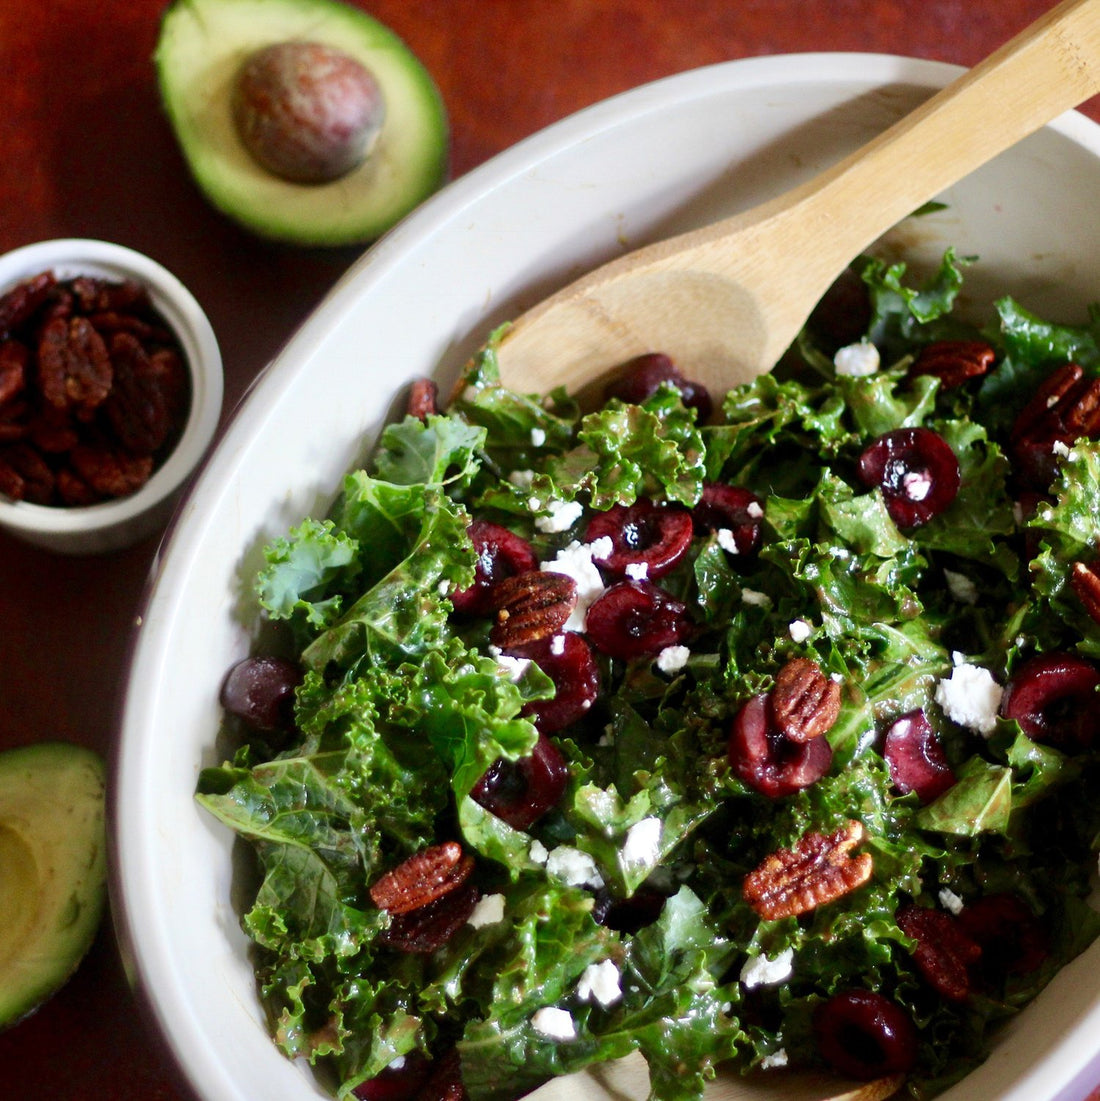 KALE SALAD WITH AVOCADO BALSAMIC DRESSING, CHERRIES AND SWEET AND SPICY PECANS